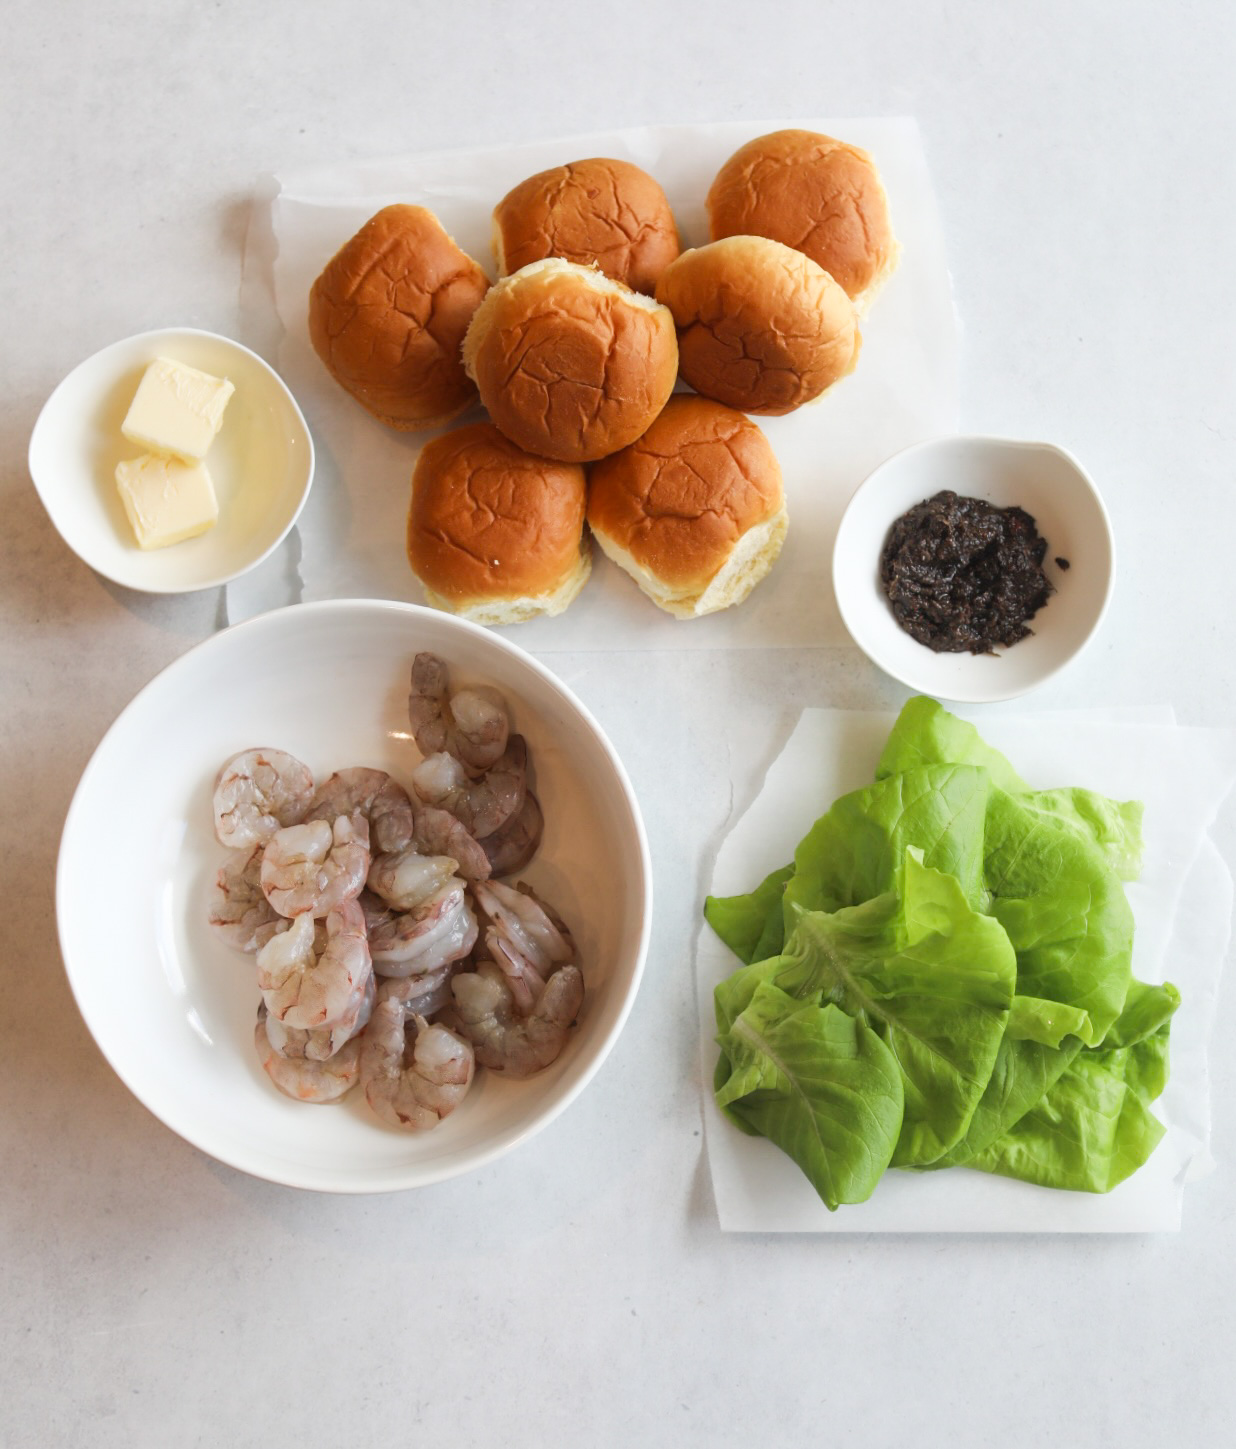 Jerk shrimp slider recipe ingredients. Slider buns are added on white parchment paper, in small white bowls are butter and jerk marinade. Shrimp are in a medium sized bowl with bibb lettuce also on parchment paper.